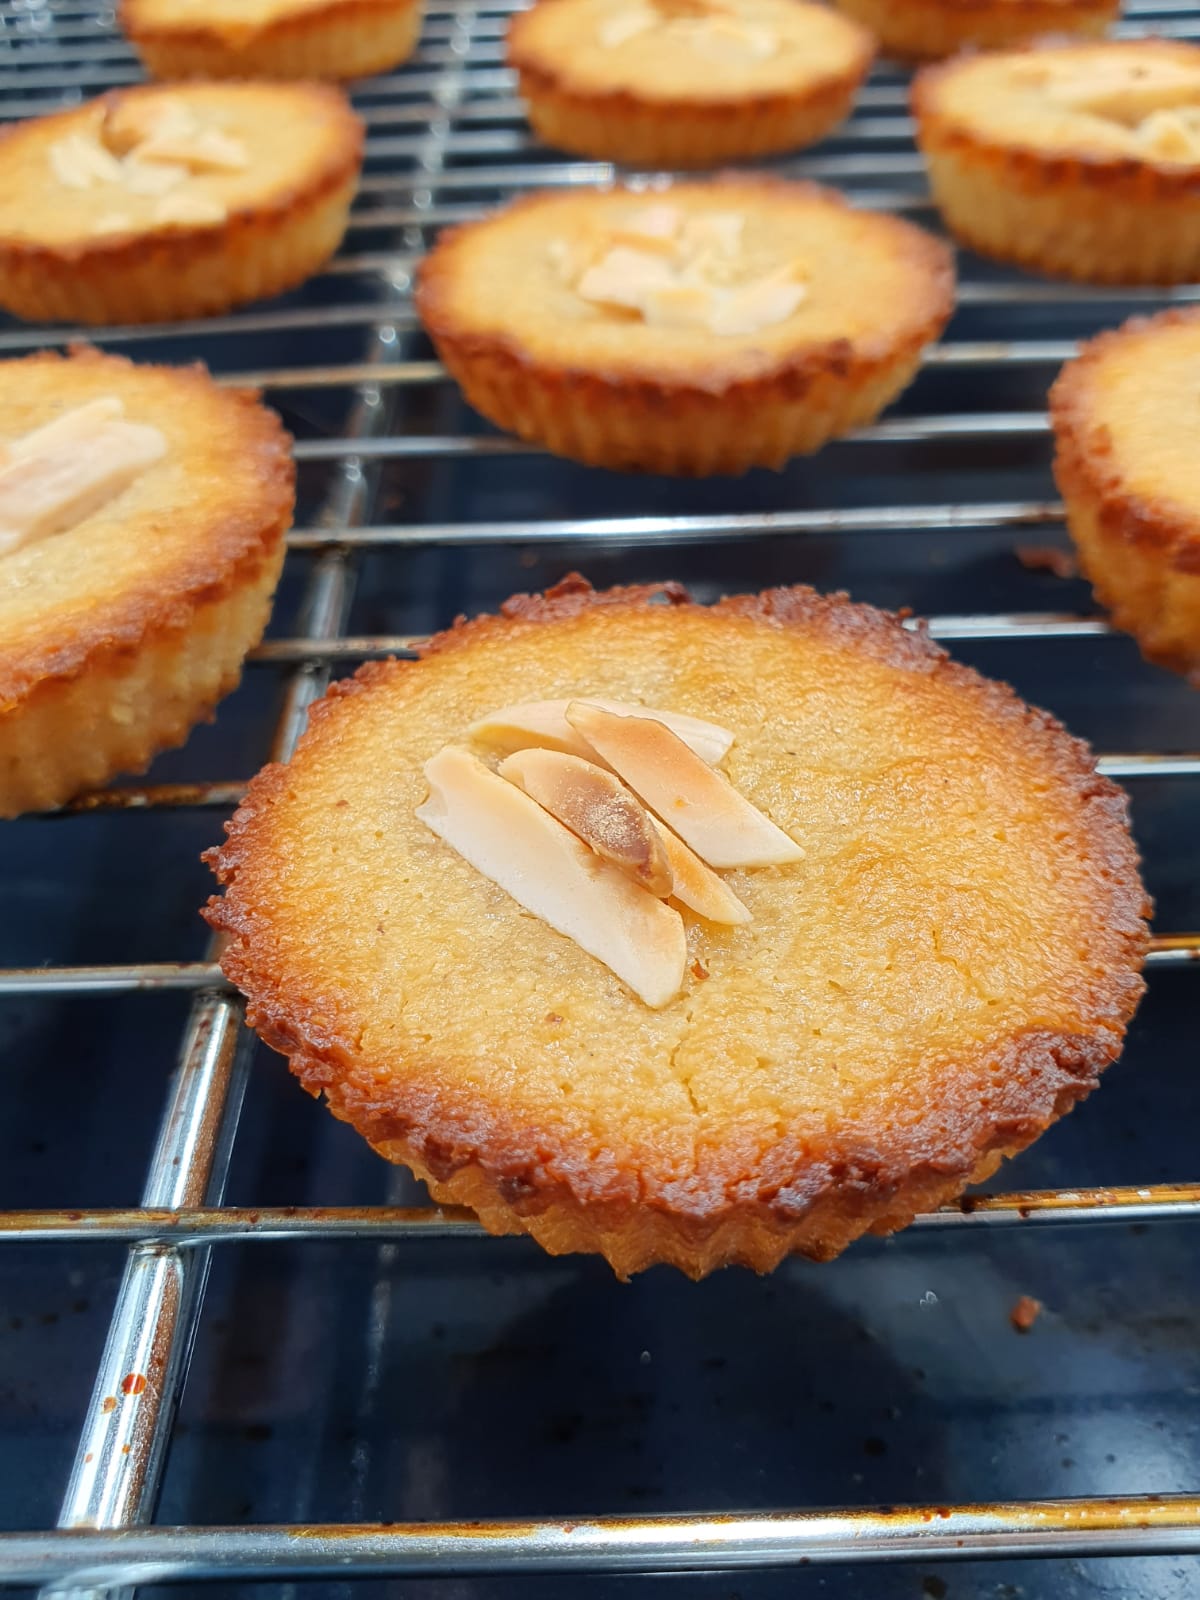 Almond Financiers (French Almond Cakes) - A Baking Journey